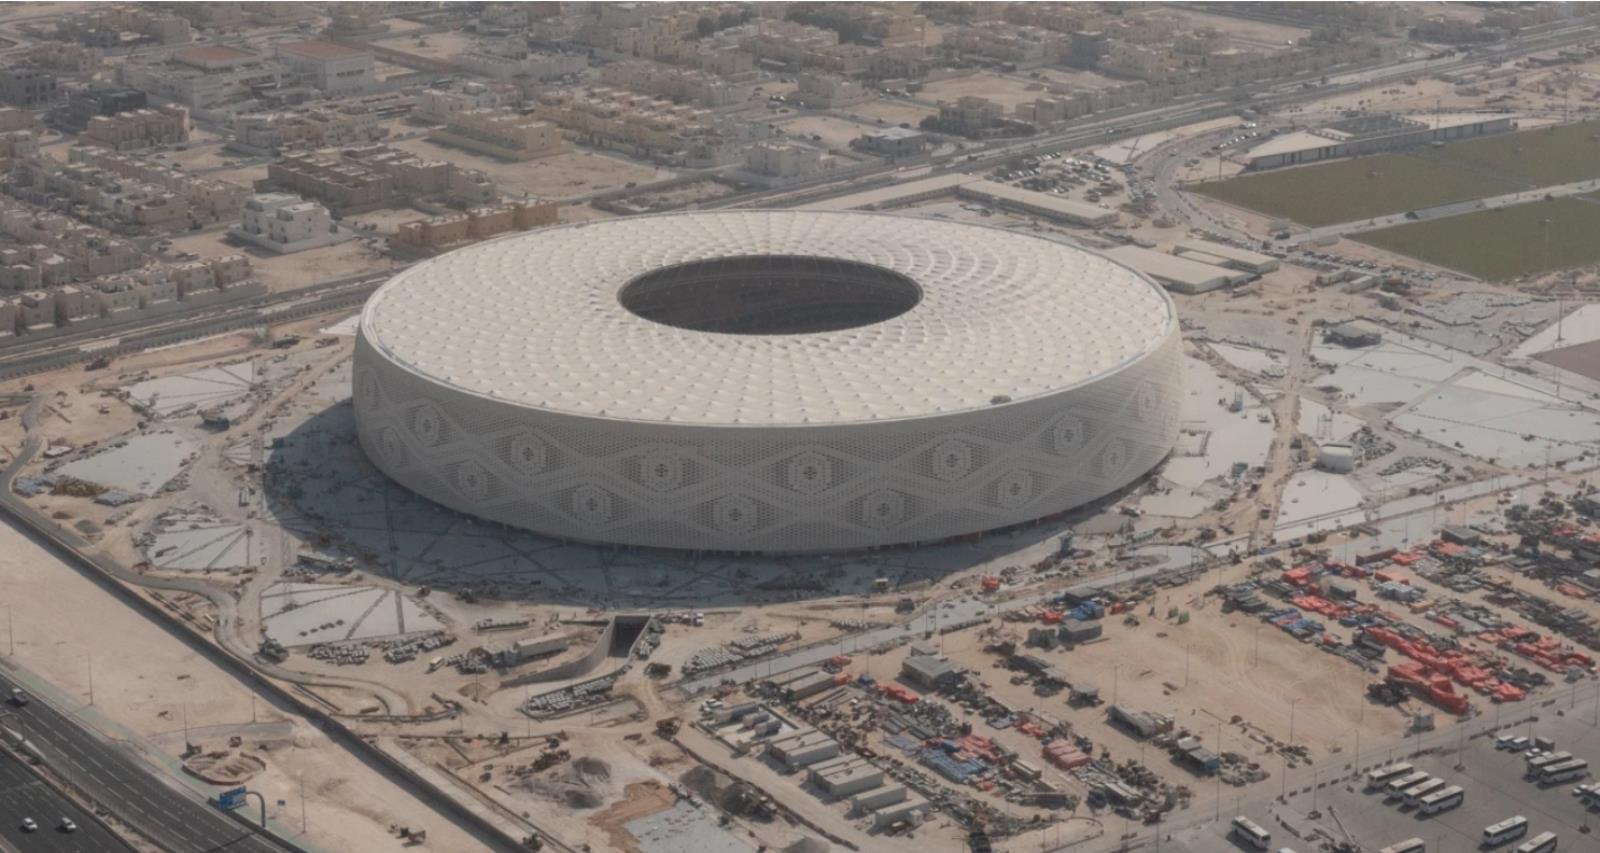 This is Al Thumama.  This stadium will host the 2022 World Cup